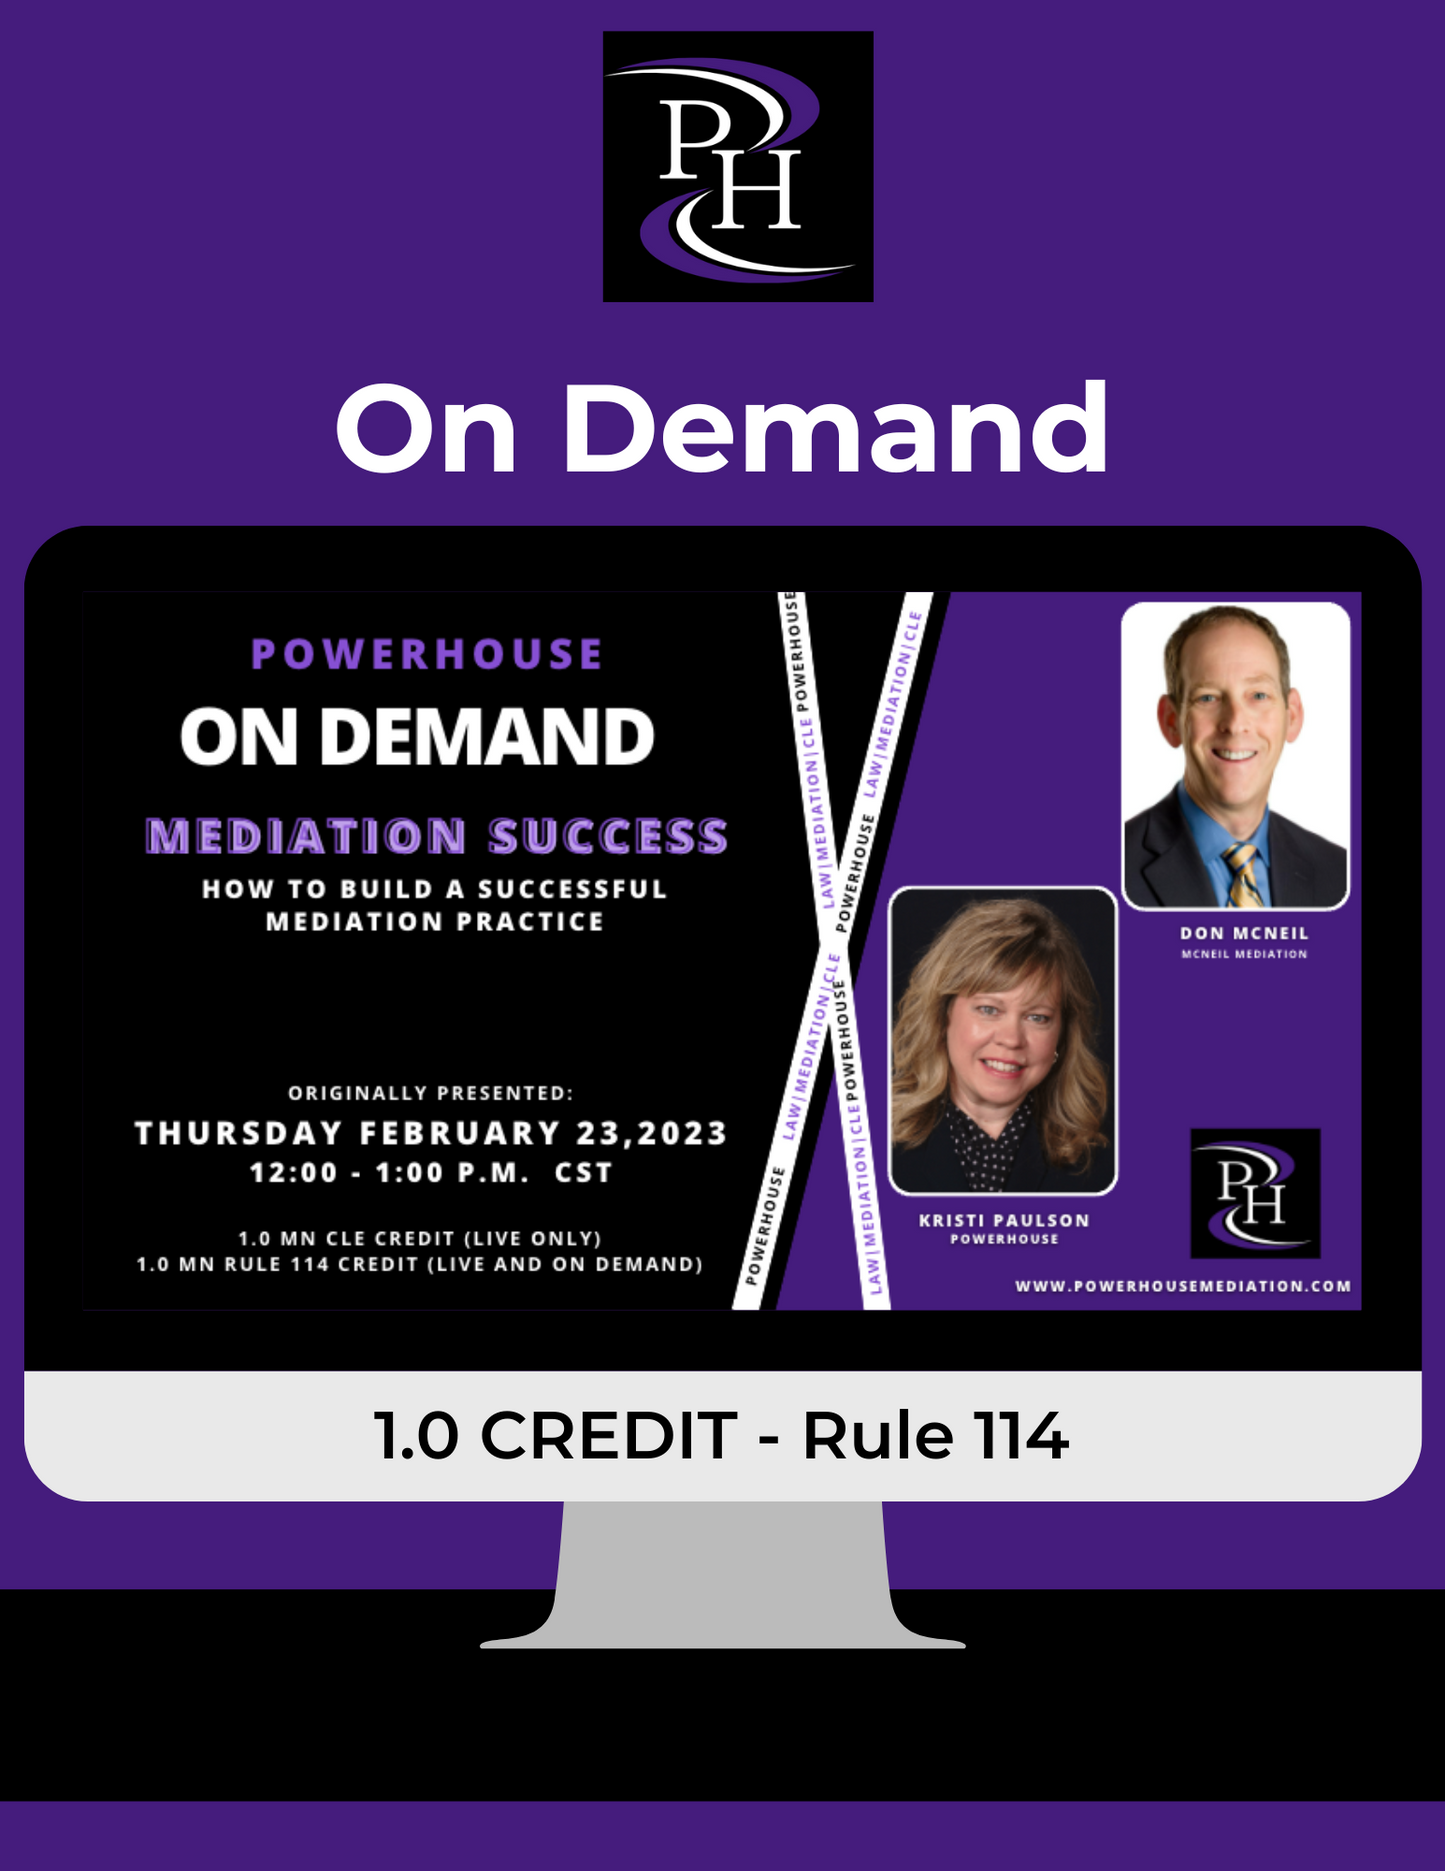 ON DEMAND - Mediation Success: How to Build a Successful Mediation Practice (Don McNeil and Kristi Paulson)